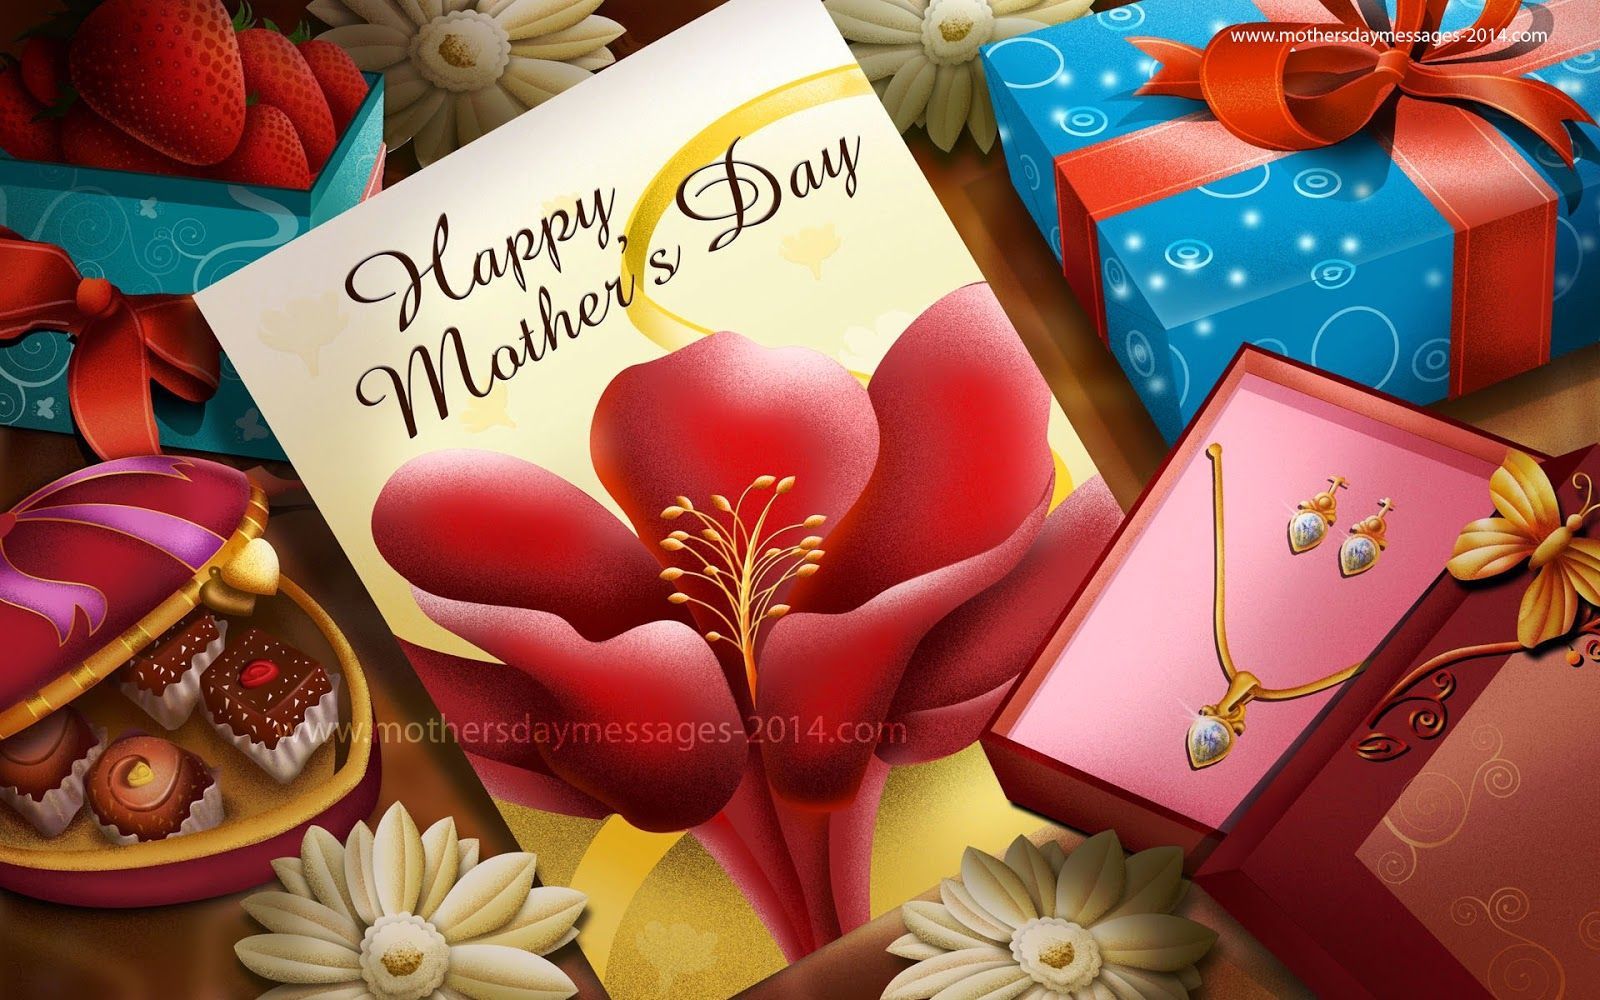 Happy Mothers day HD wallpaper, Image for free download in English. Happy mothers day wallpaper, Mothers day wishes image, Happy mother's day card